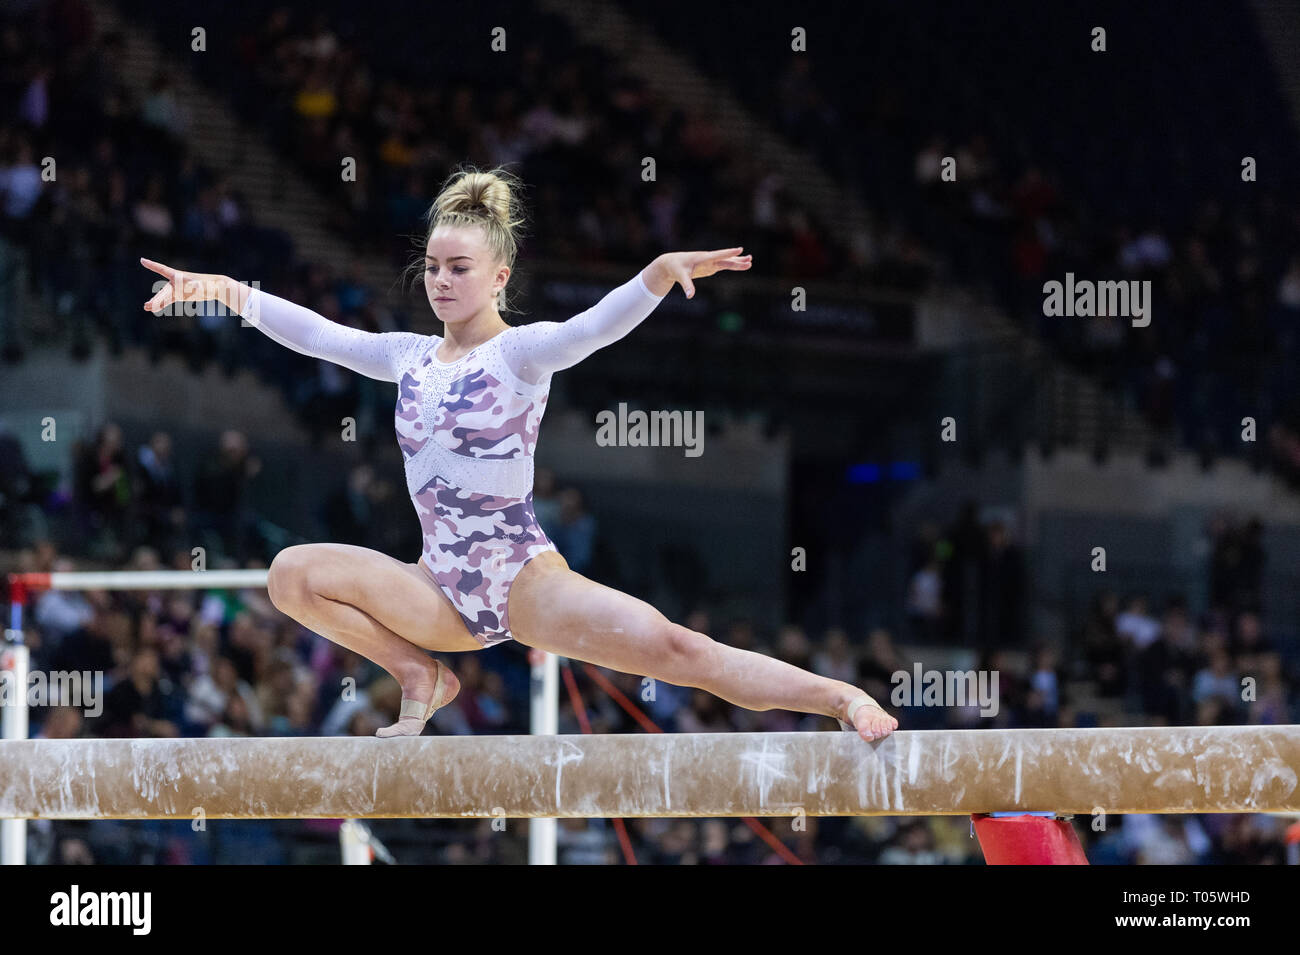 Liverpool, UK. 17th March 2019. Halle Hilton of South Essex Gymnastics competing at the Men’s and Women’s Artistic British Championships 2019, M&S Bank Arena, Liverpool, UK. Credit: Iain Scott Photography/Alamy Live News Stock Photo